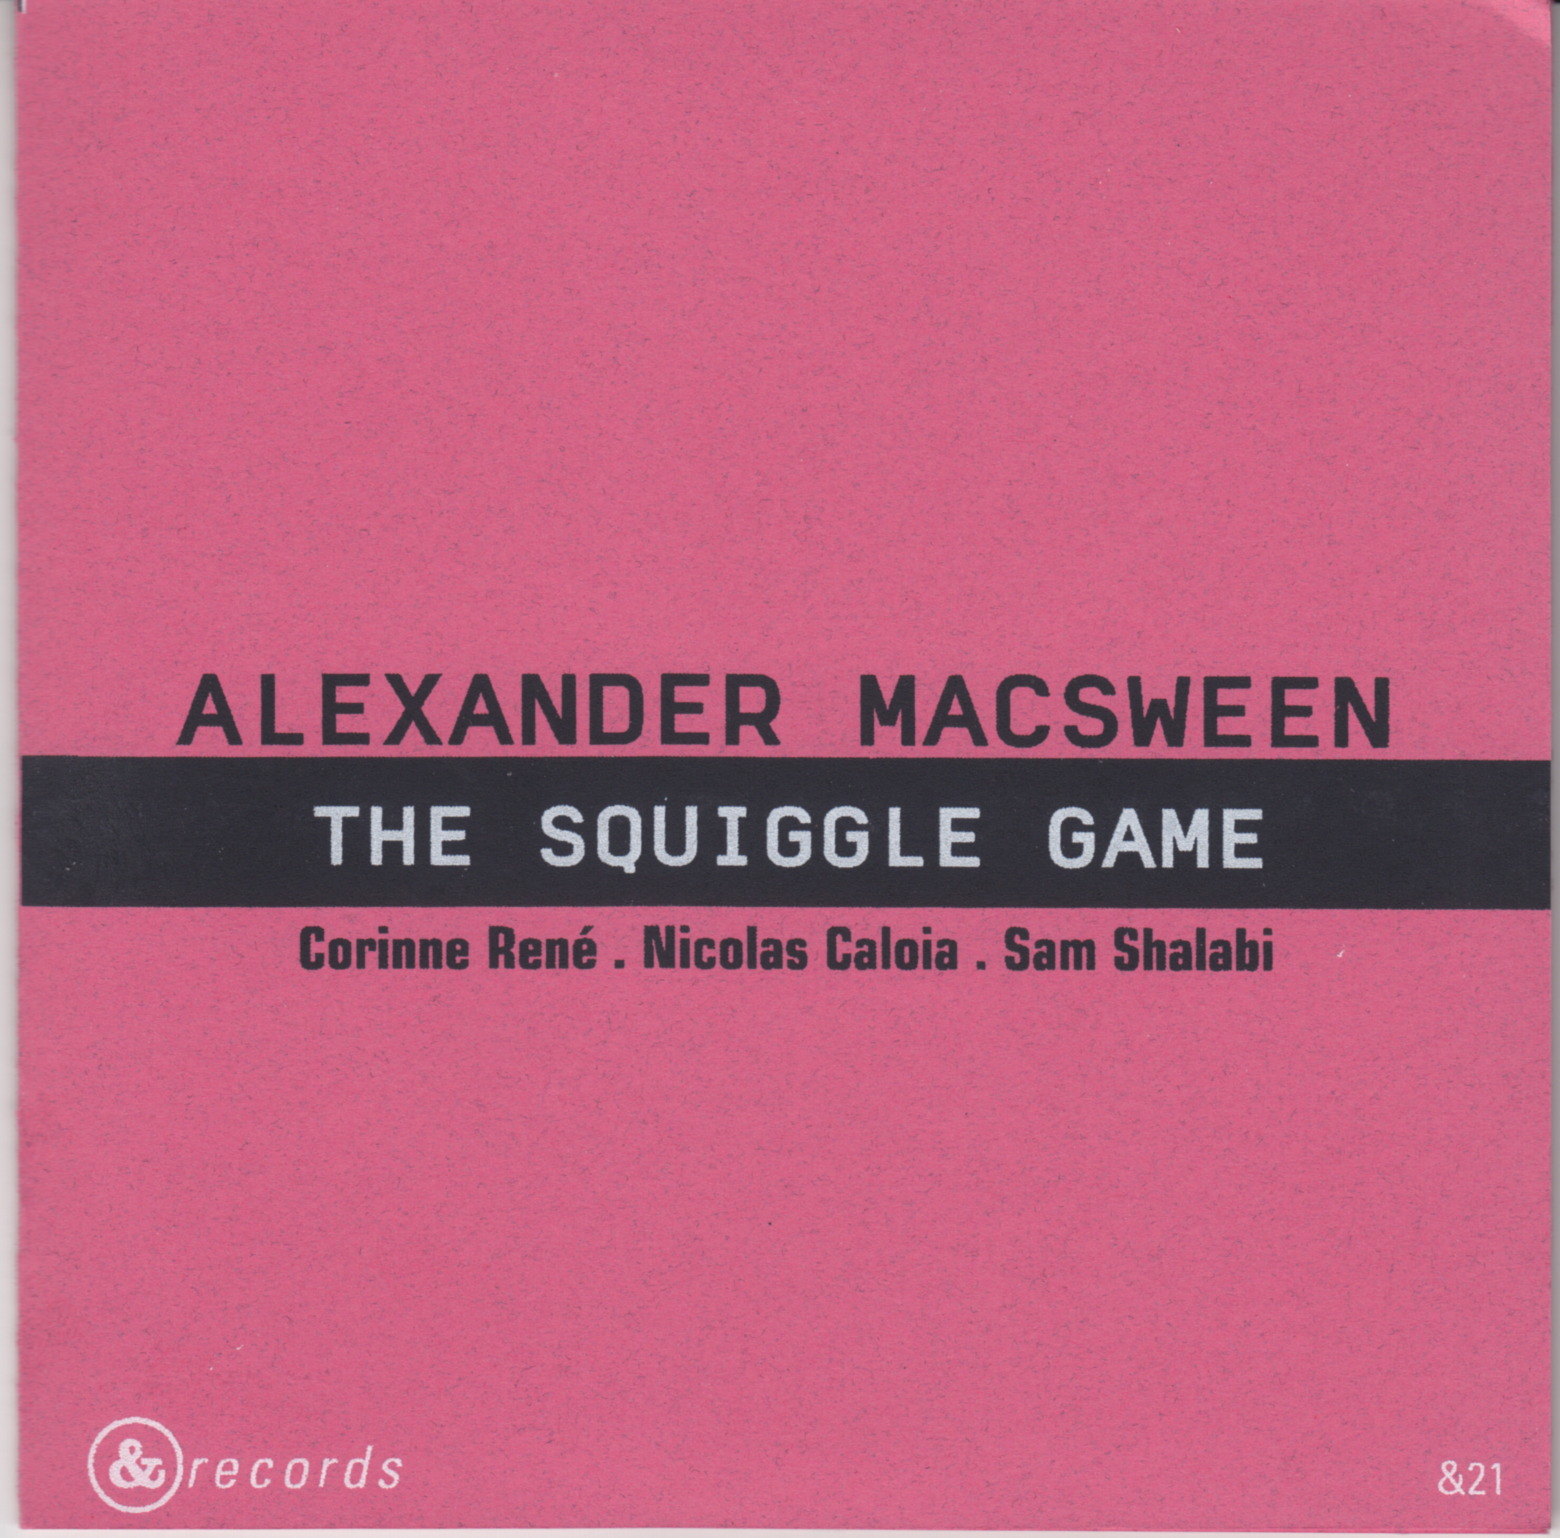 Alexander MacSween: The Squiggle Game